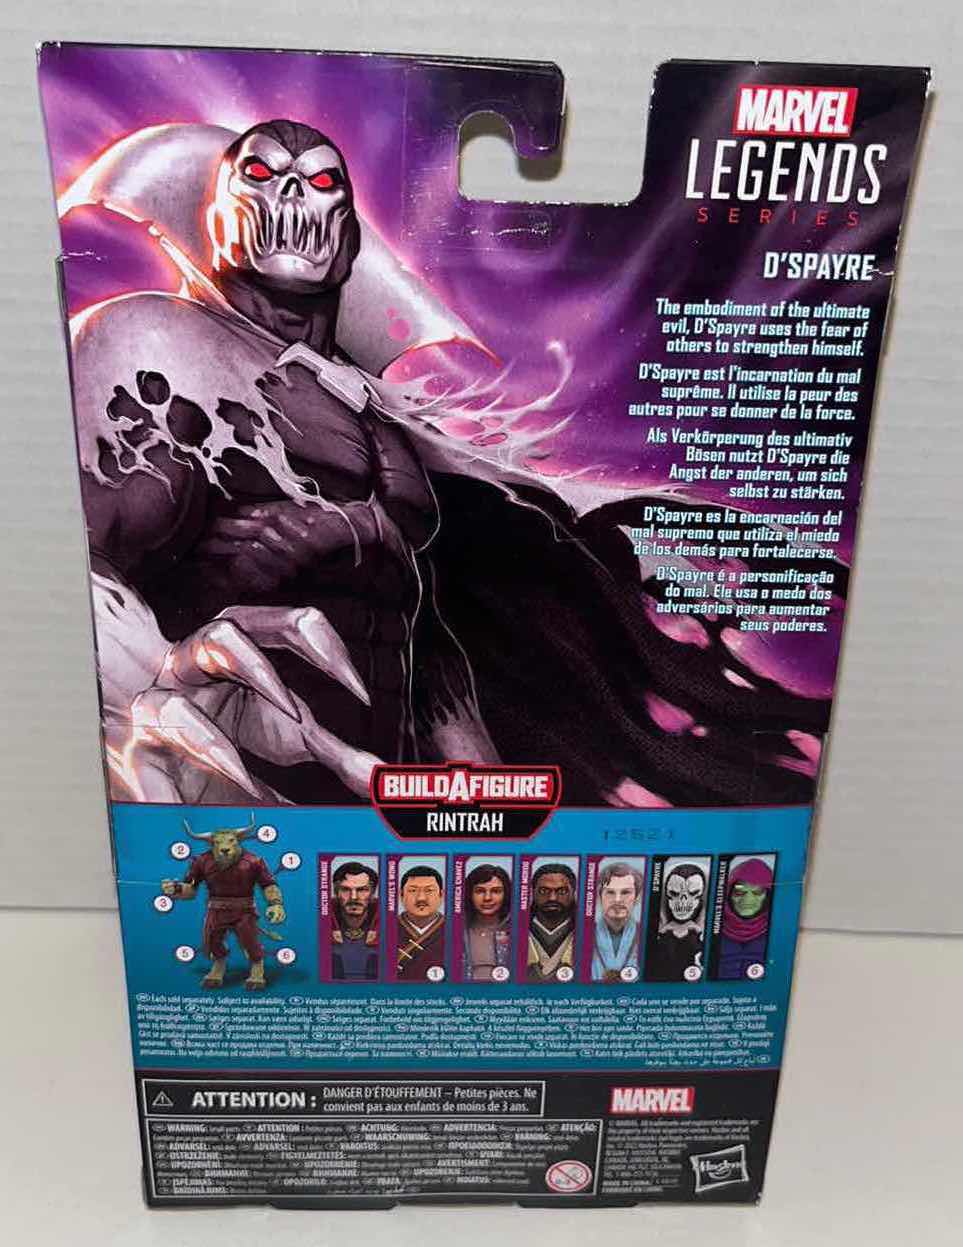 Photo 3 of NEW HASBRO MARVEL LEGEND SERIES ACTION FIGURE & ACCESSORIES, “D’SPAYRE” $30.00 (1)